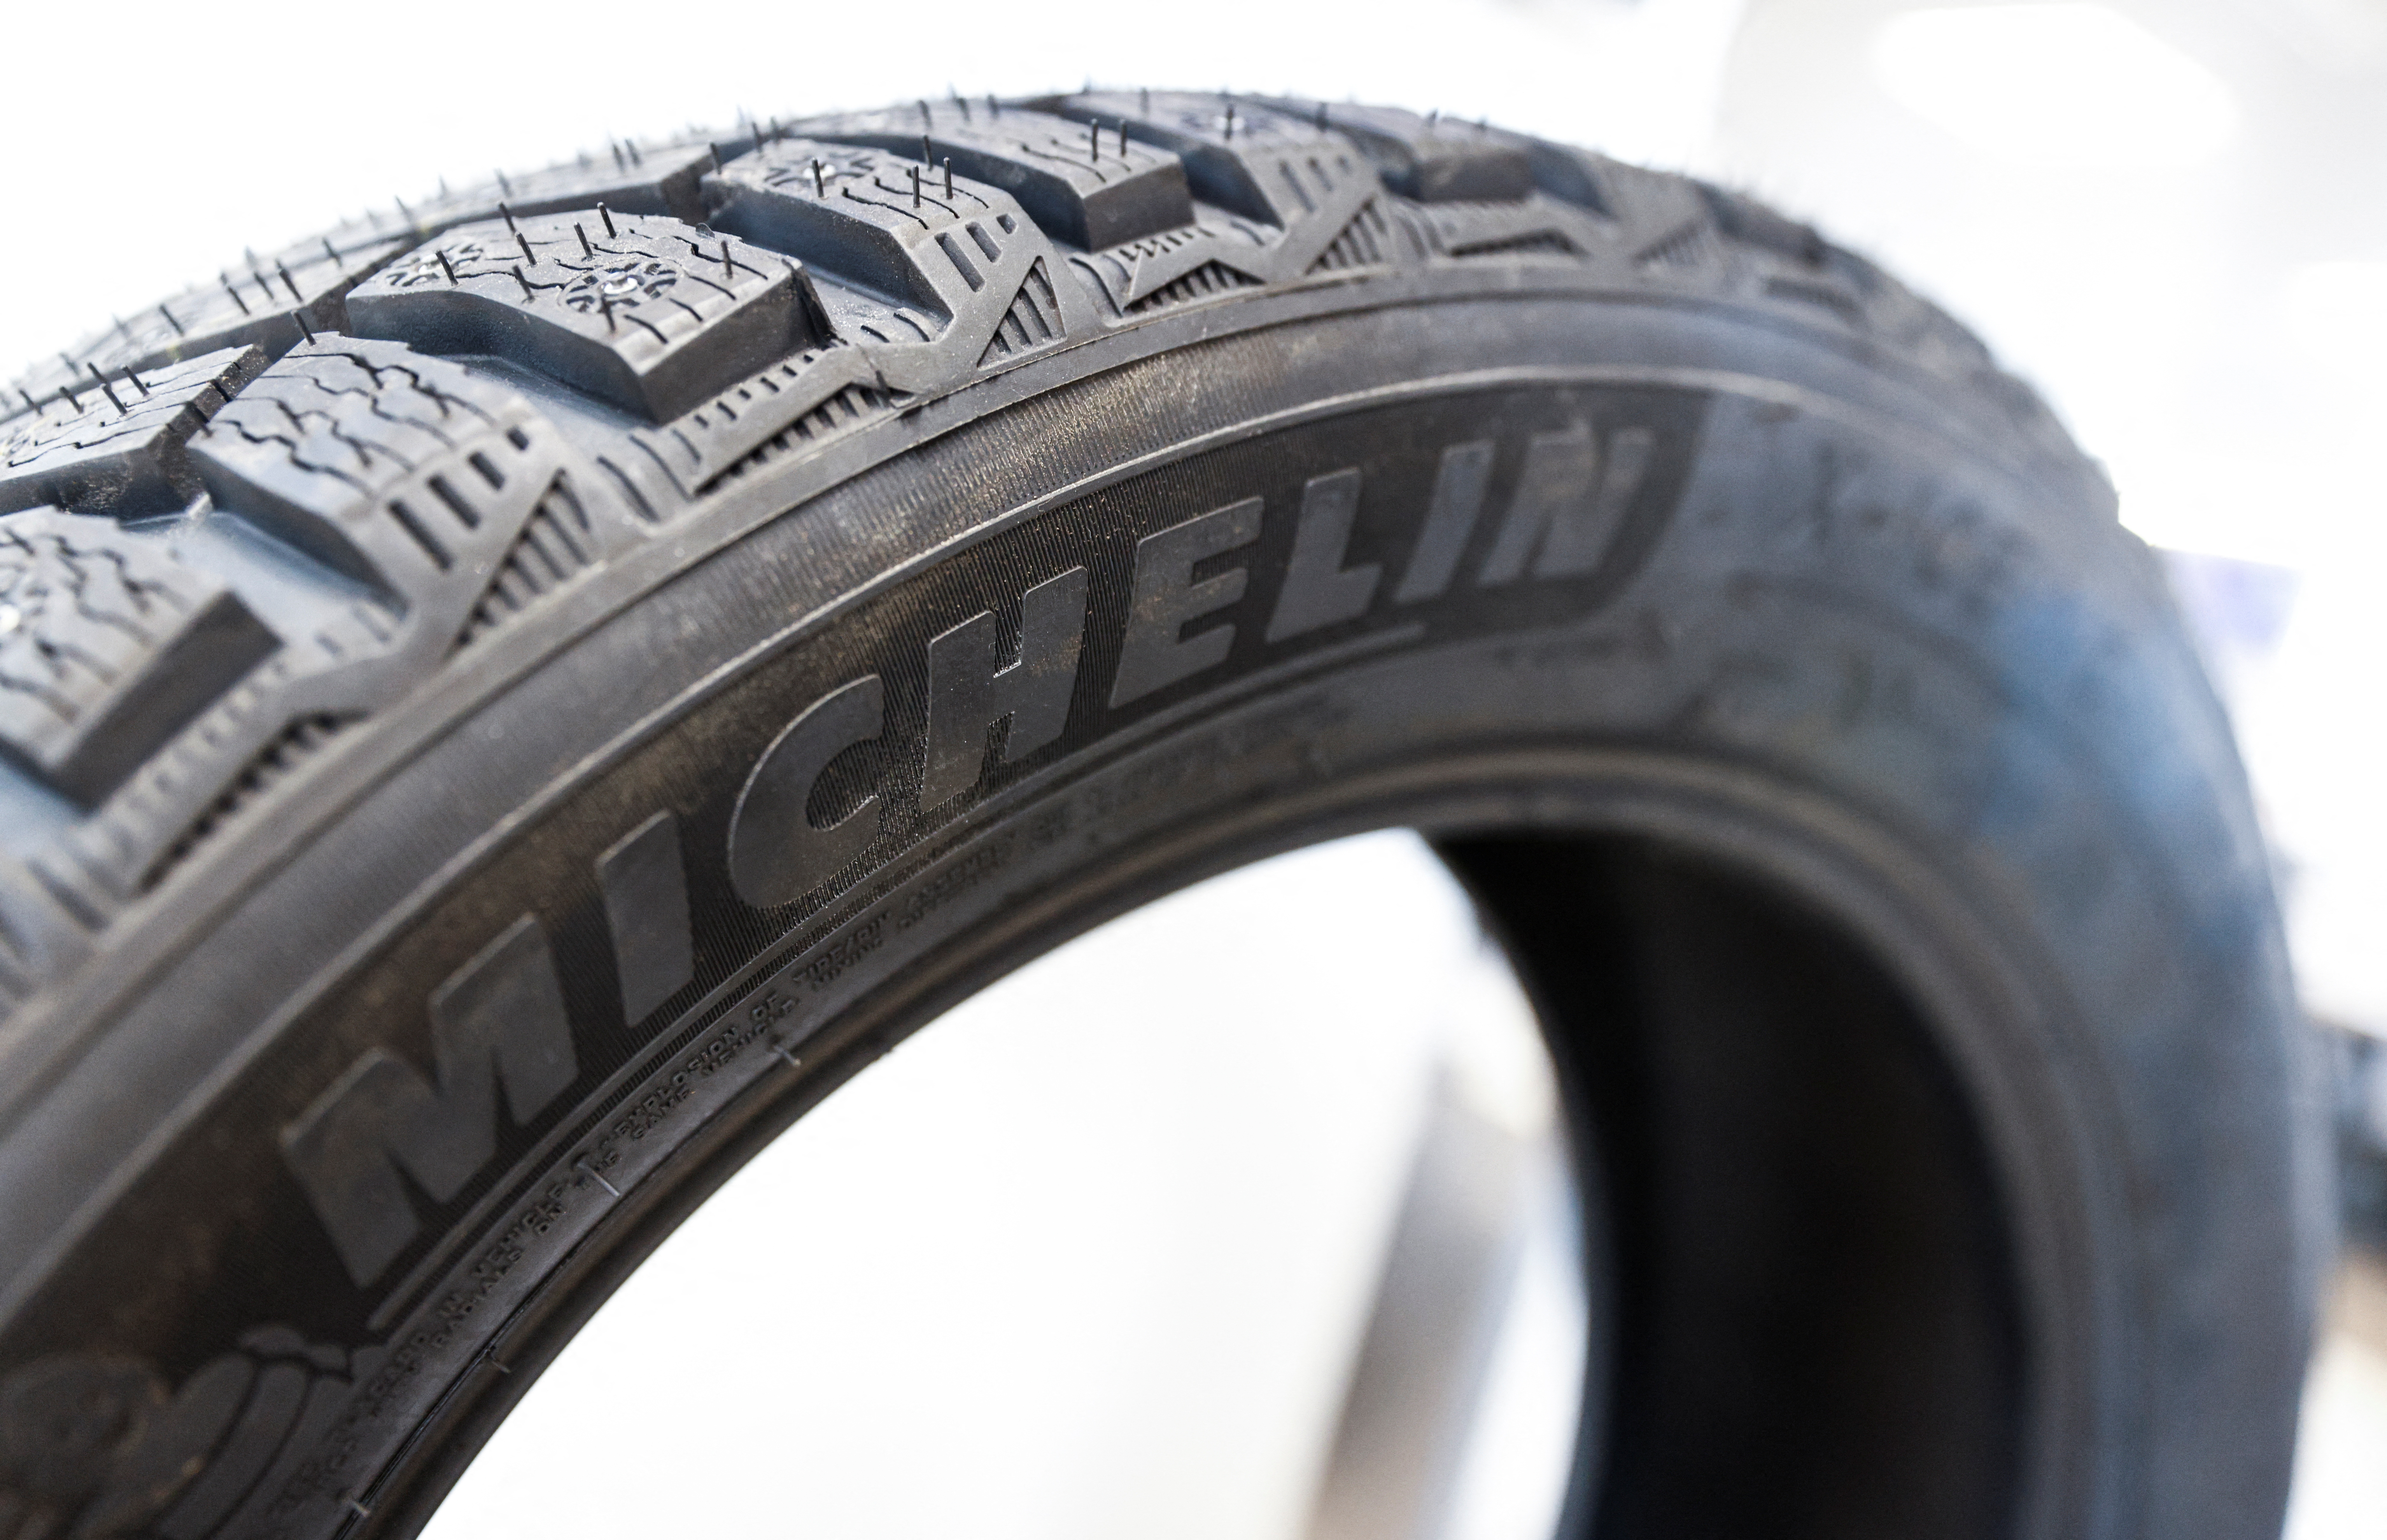 A tyre produced by the French company Michelin is on display at a dealership in Moscow